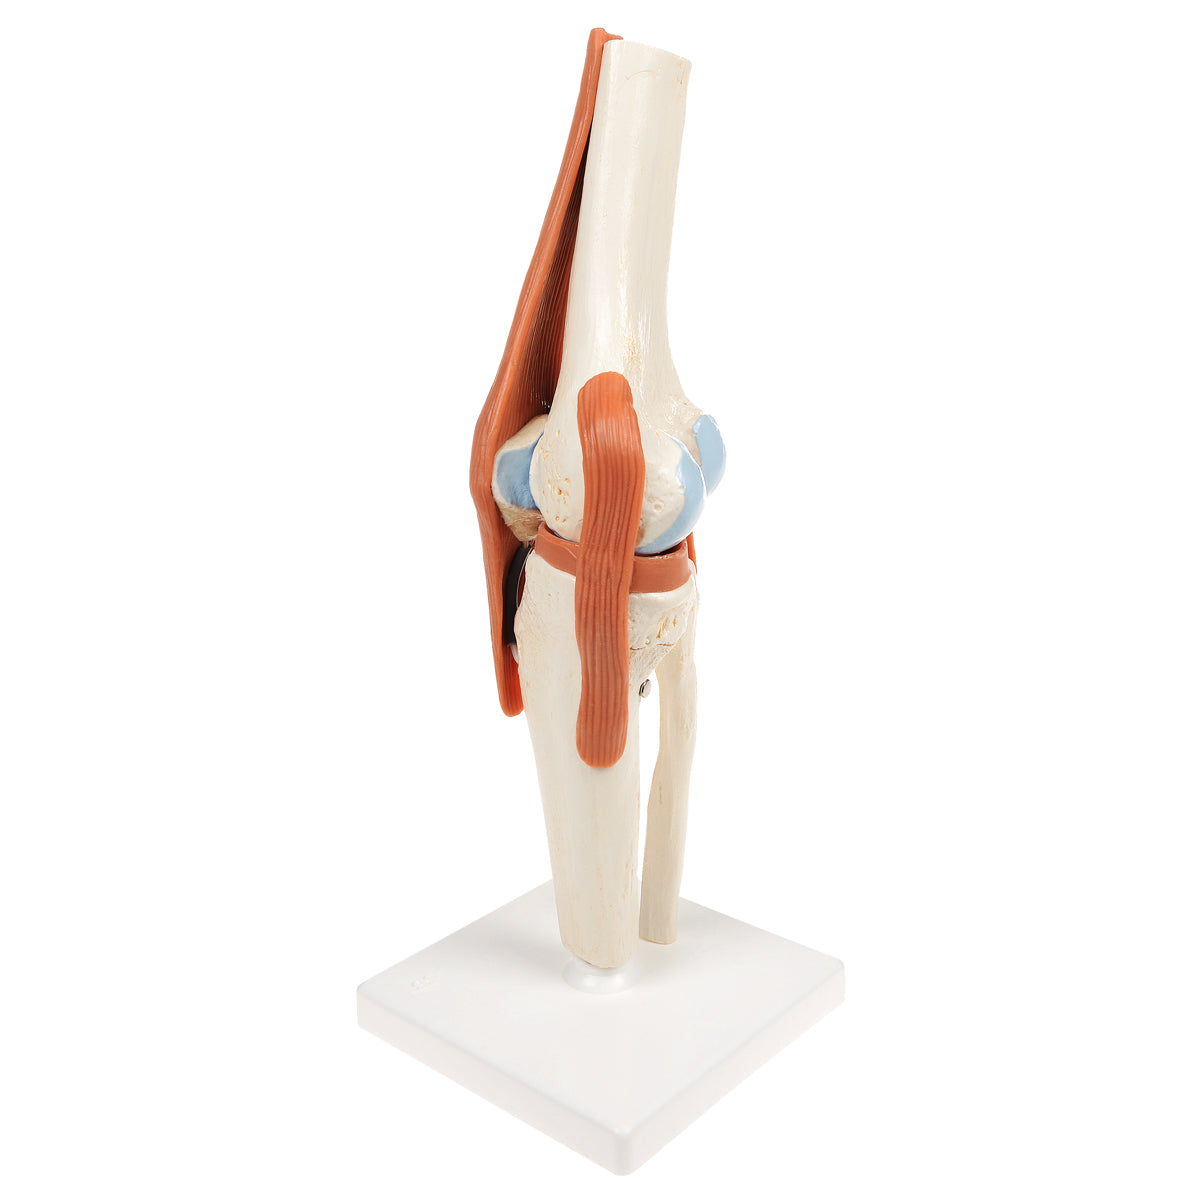 Flexible knee model with ligaments and colored joint surfaces